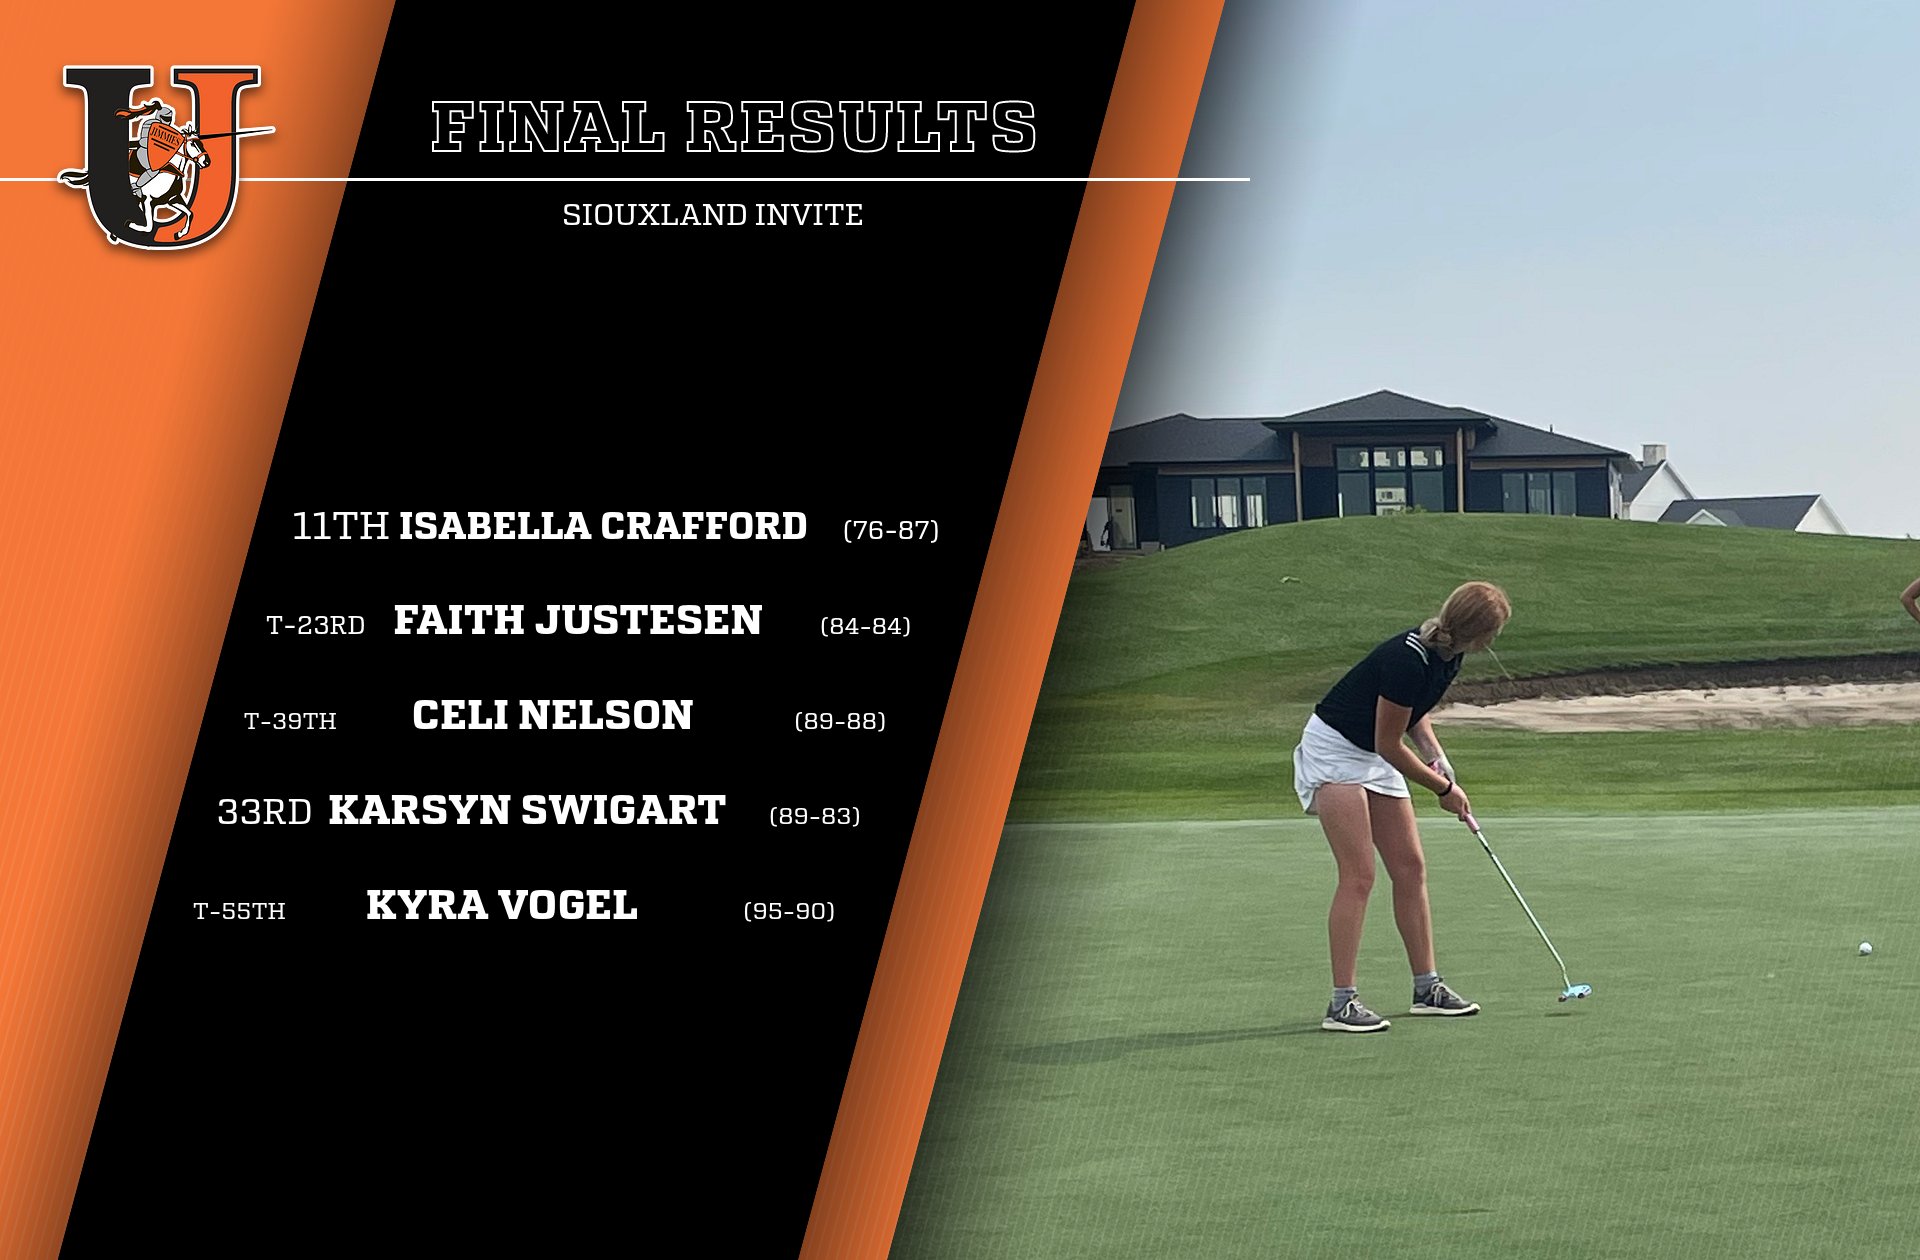 Jimmies finish 7th at Siouxland Invite